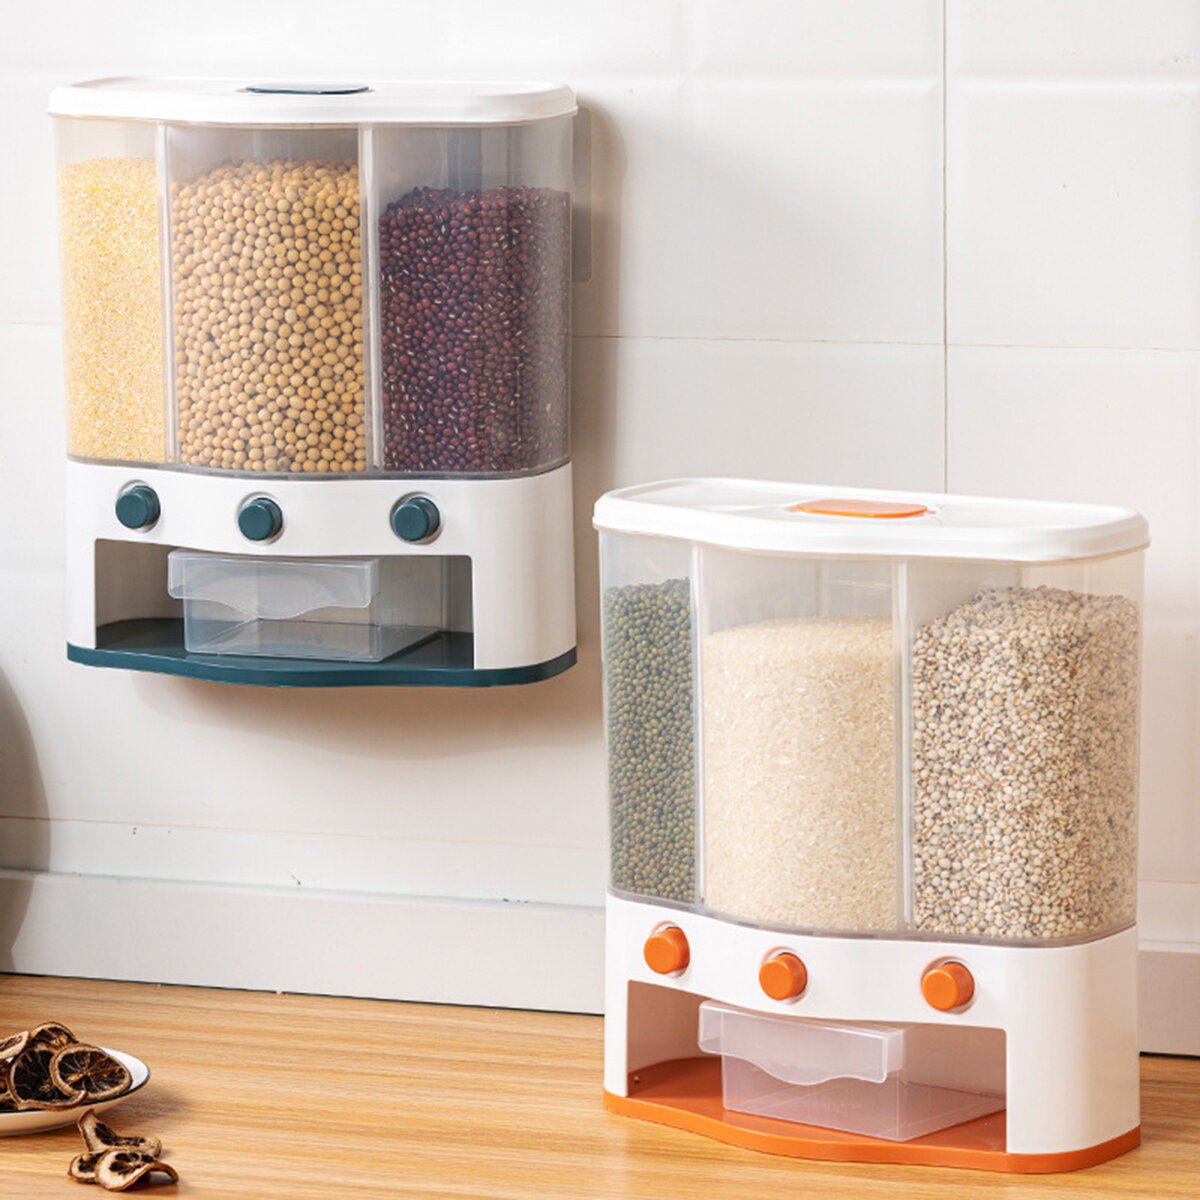 

Wall Mounted Cereal Dispenser Dry Food Storage Container Dispenser Rice Bucket Multi Compartments Automatic Metering Sto